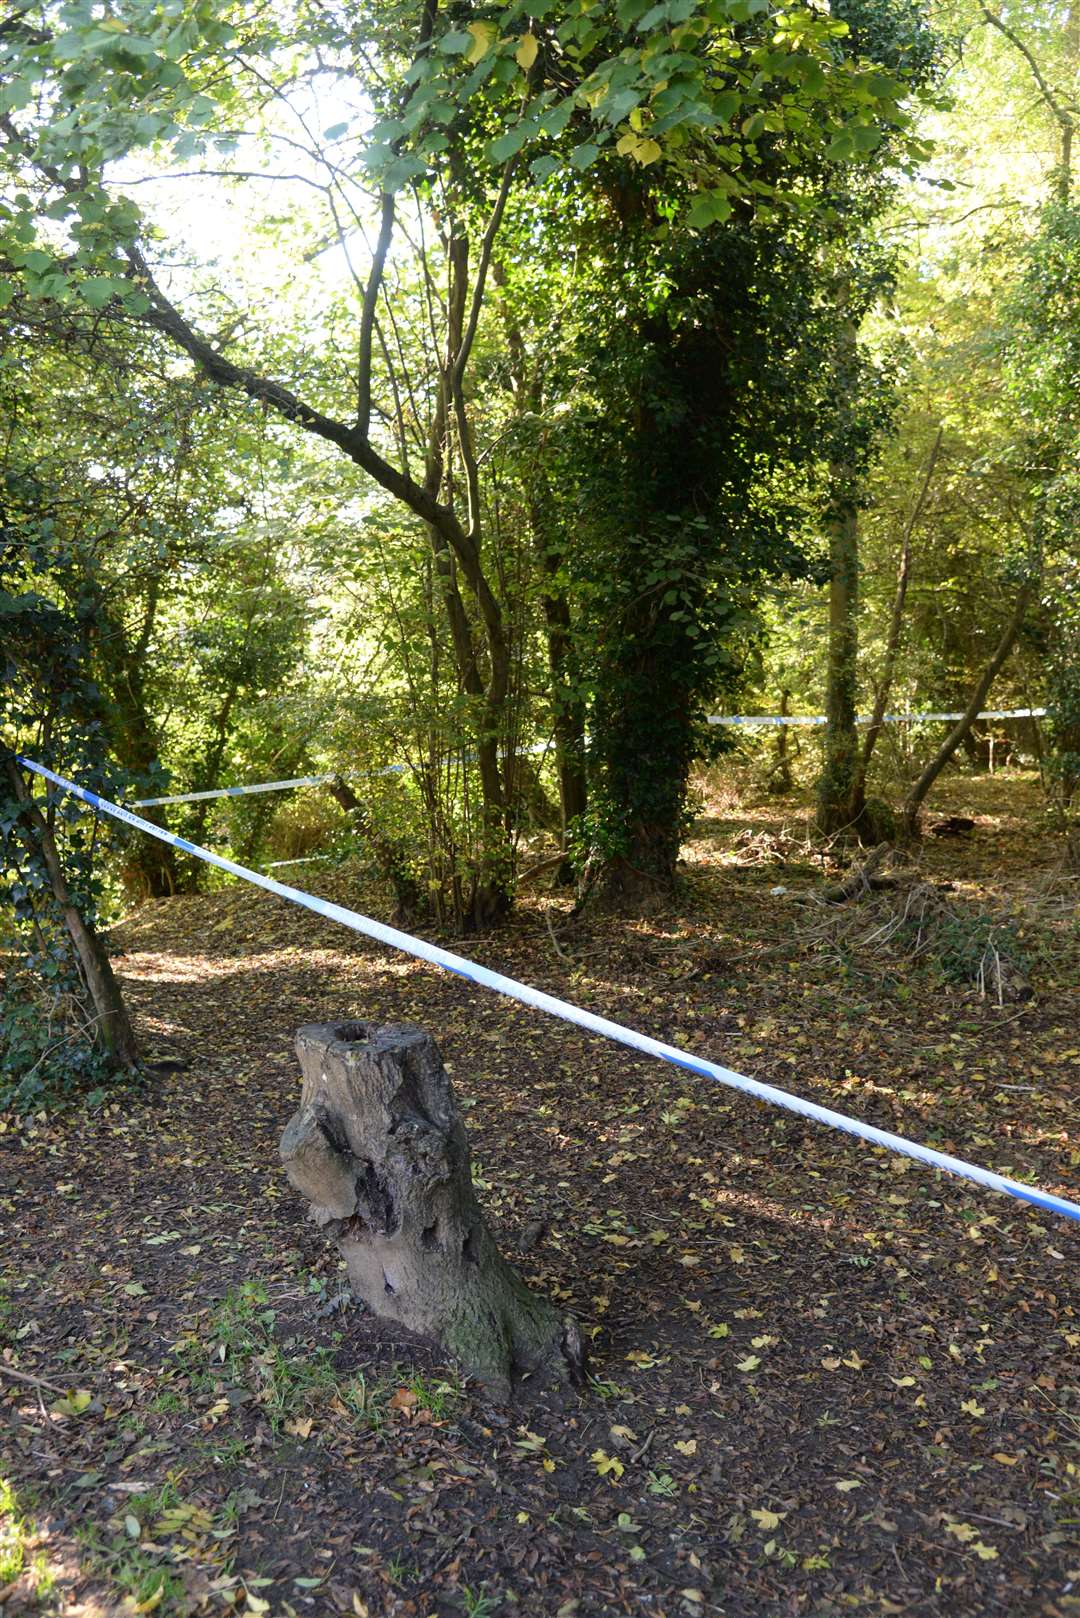 Police have cordoned off an area of woodland behind Bazes Shaw